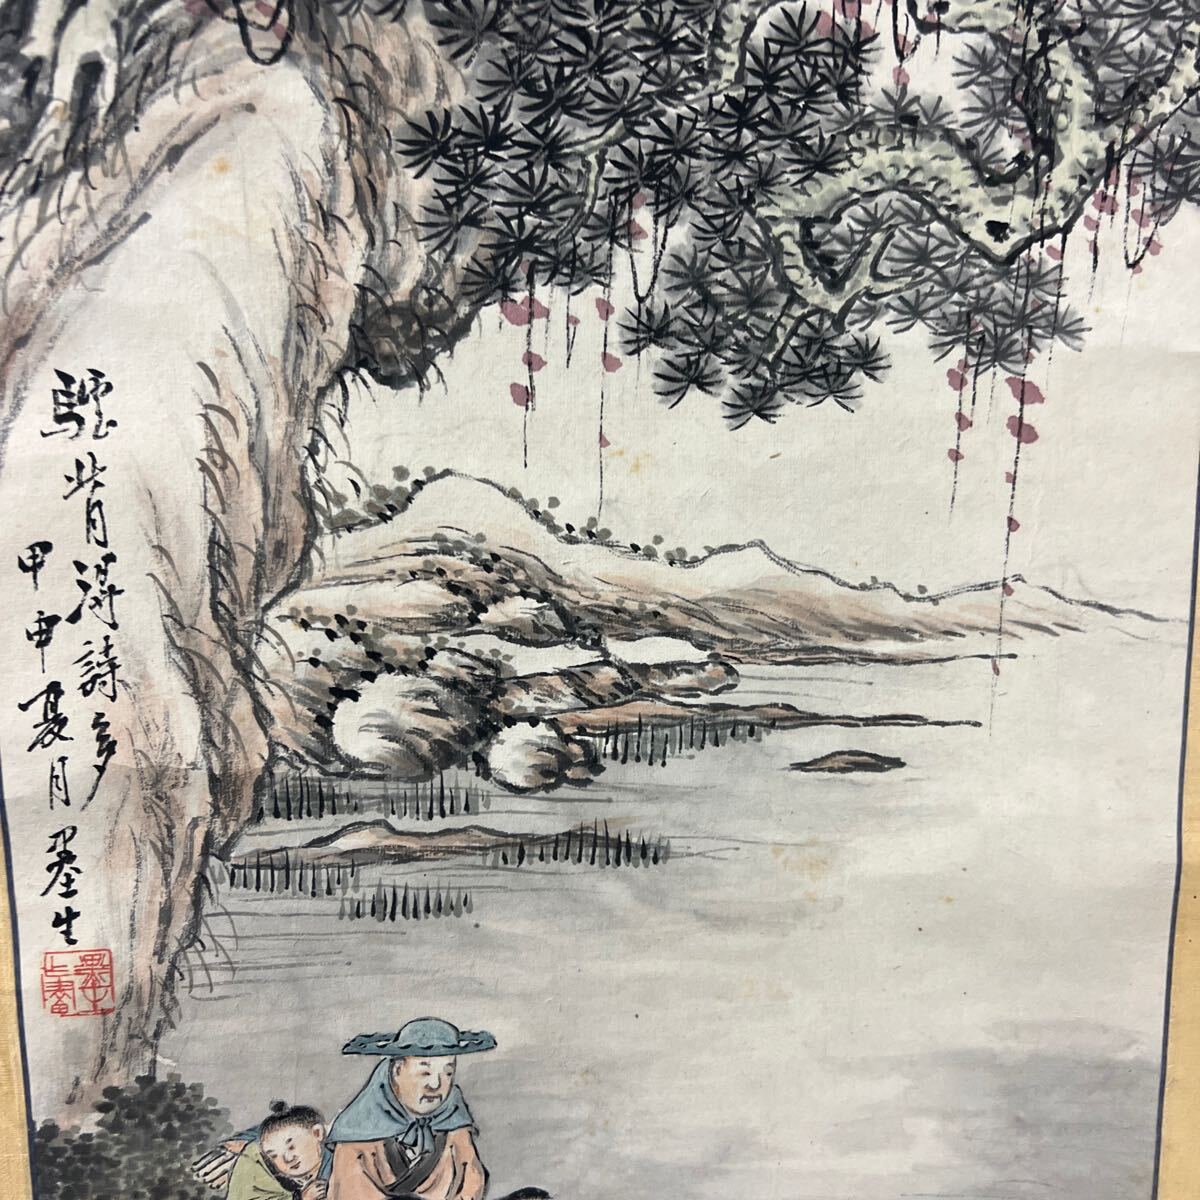  hanging scroll details unknown A1